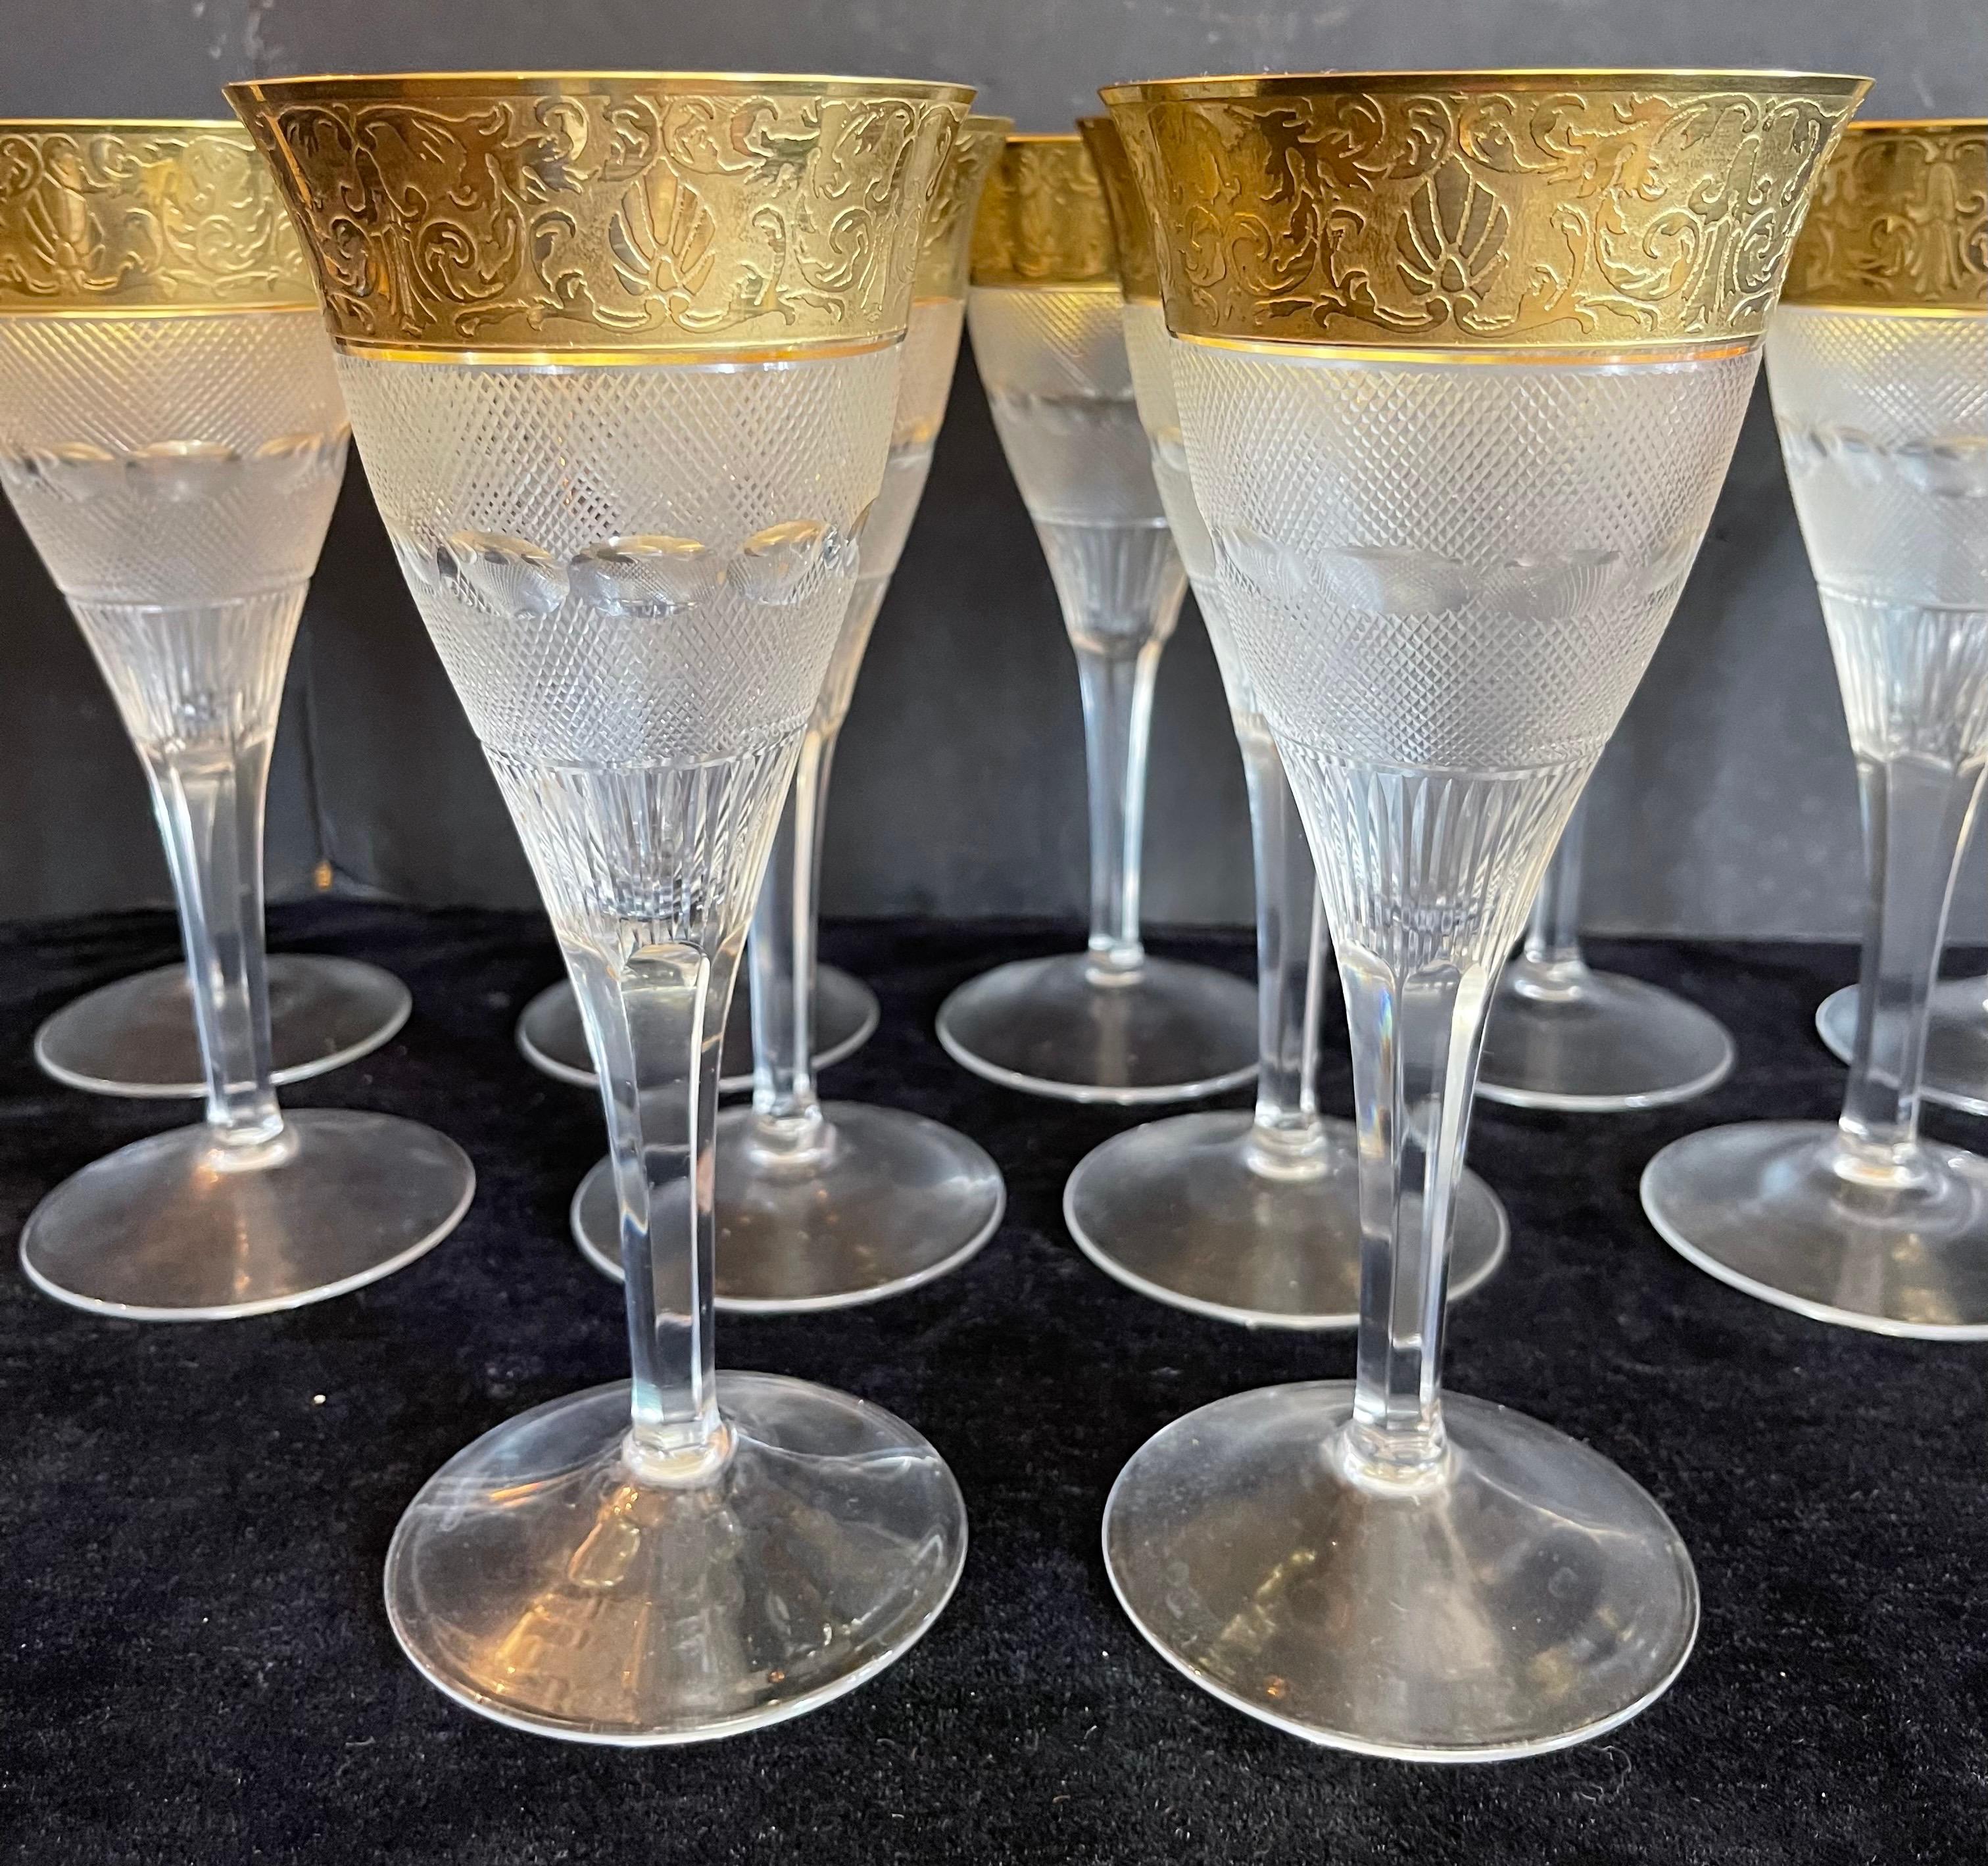 A Wonderful Set Of 25 Moser Splendid Cut Crystal 24K Gold Rim White Wine Glasses Goblets. The Splendid Pattern Originally Designed In 1911 And Quickly Became The Magnum Opus Of Moser's Patterns. The Crystal Body Is Diamond Crosscut By Hand With An